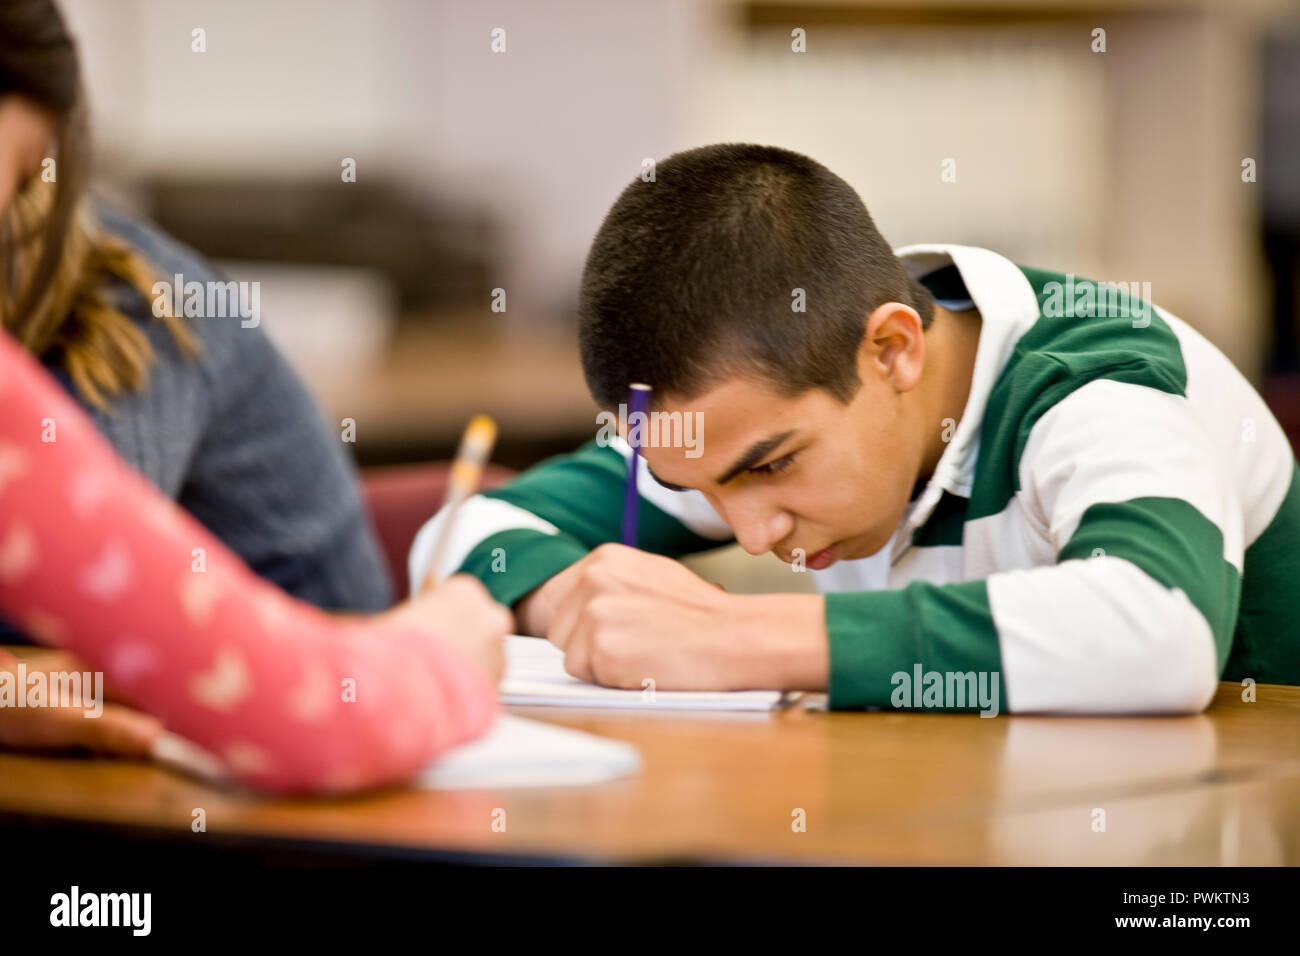 Teenage boy doing schoolwork while seated at a desk. Stock Photo